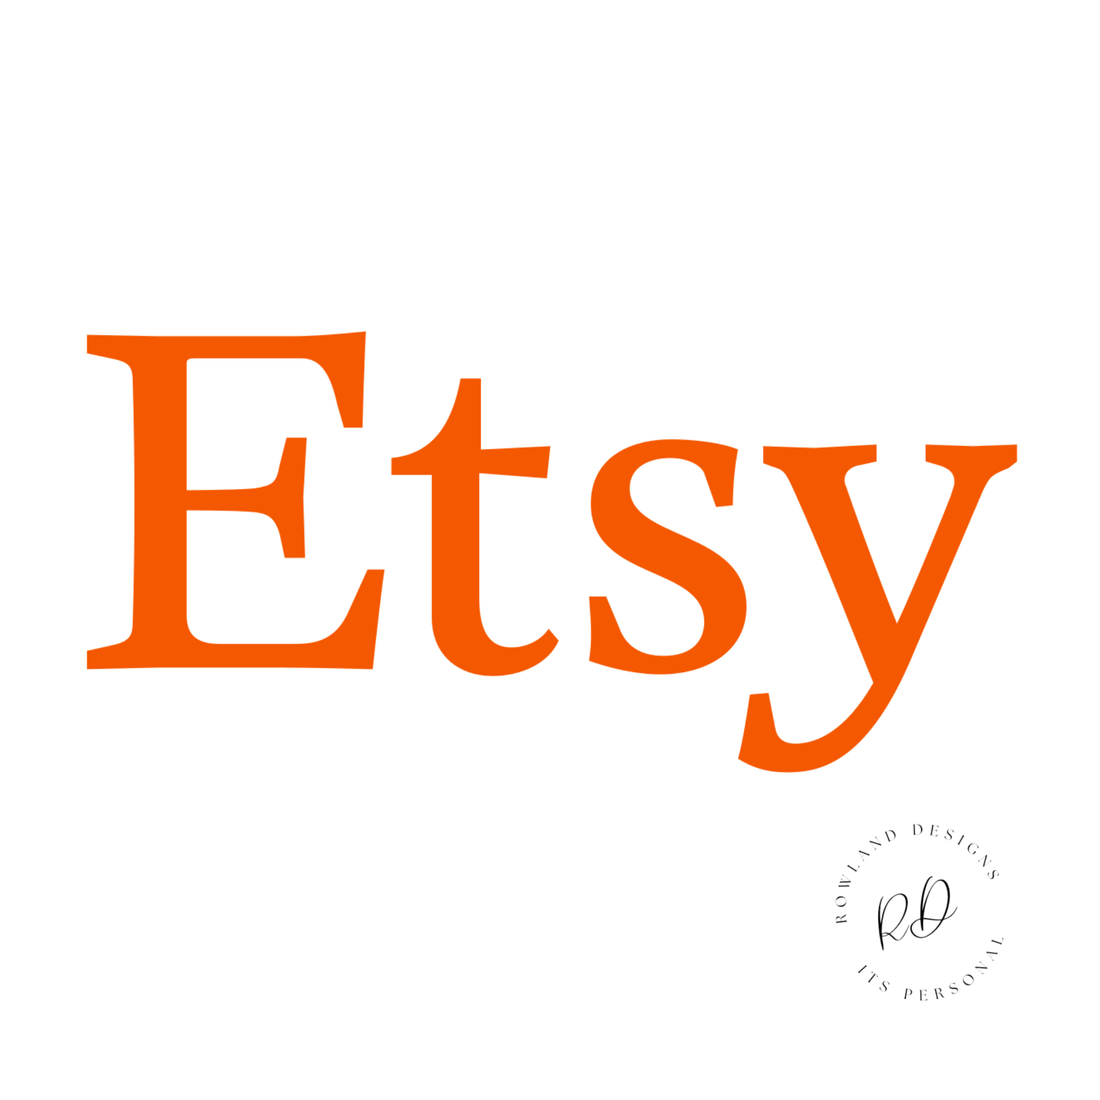 Etsy: Explore Our Personalised Collection